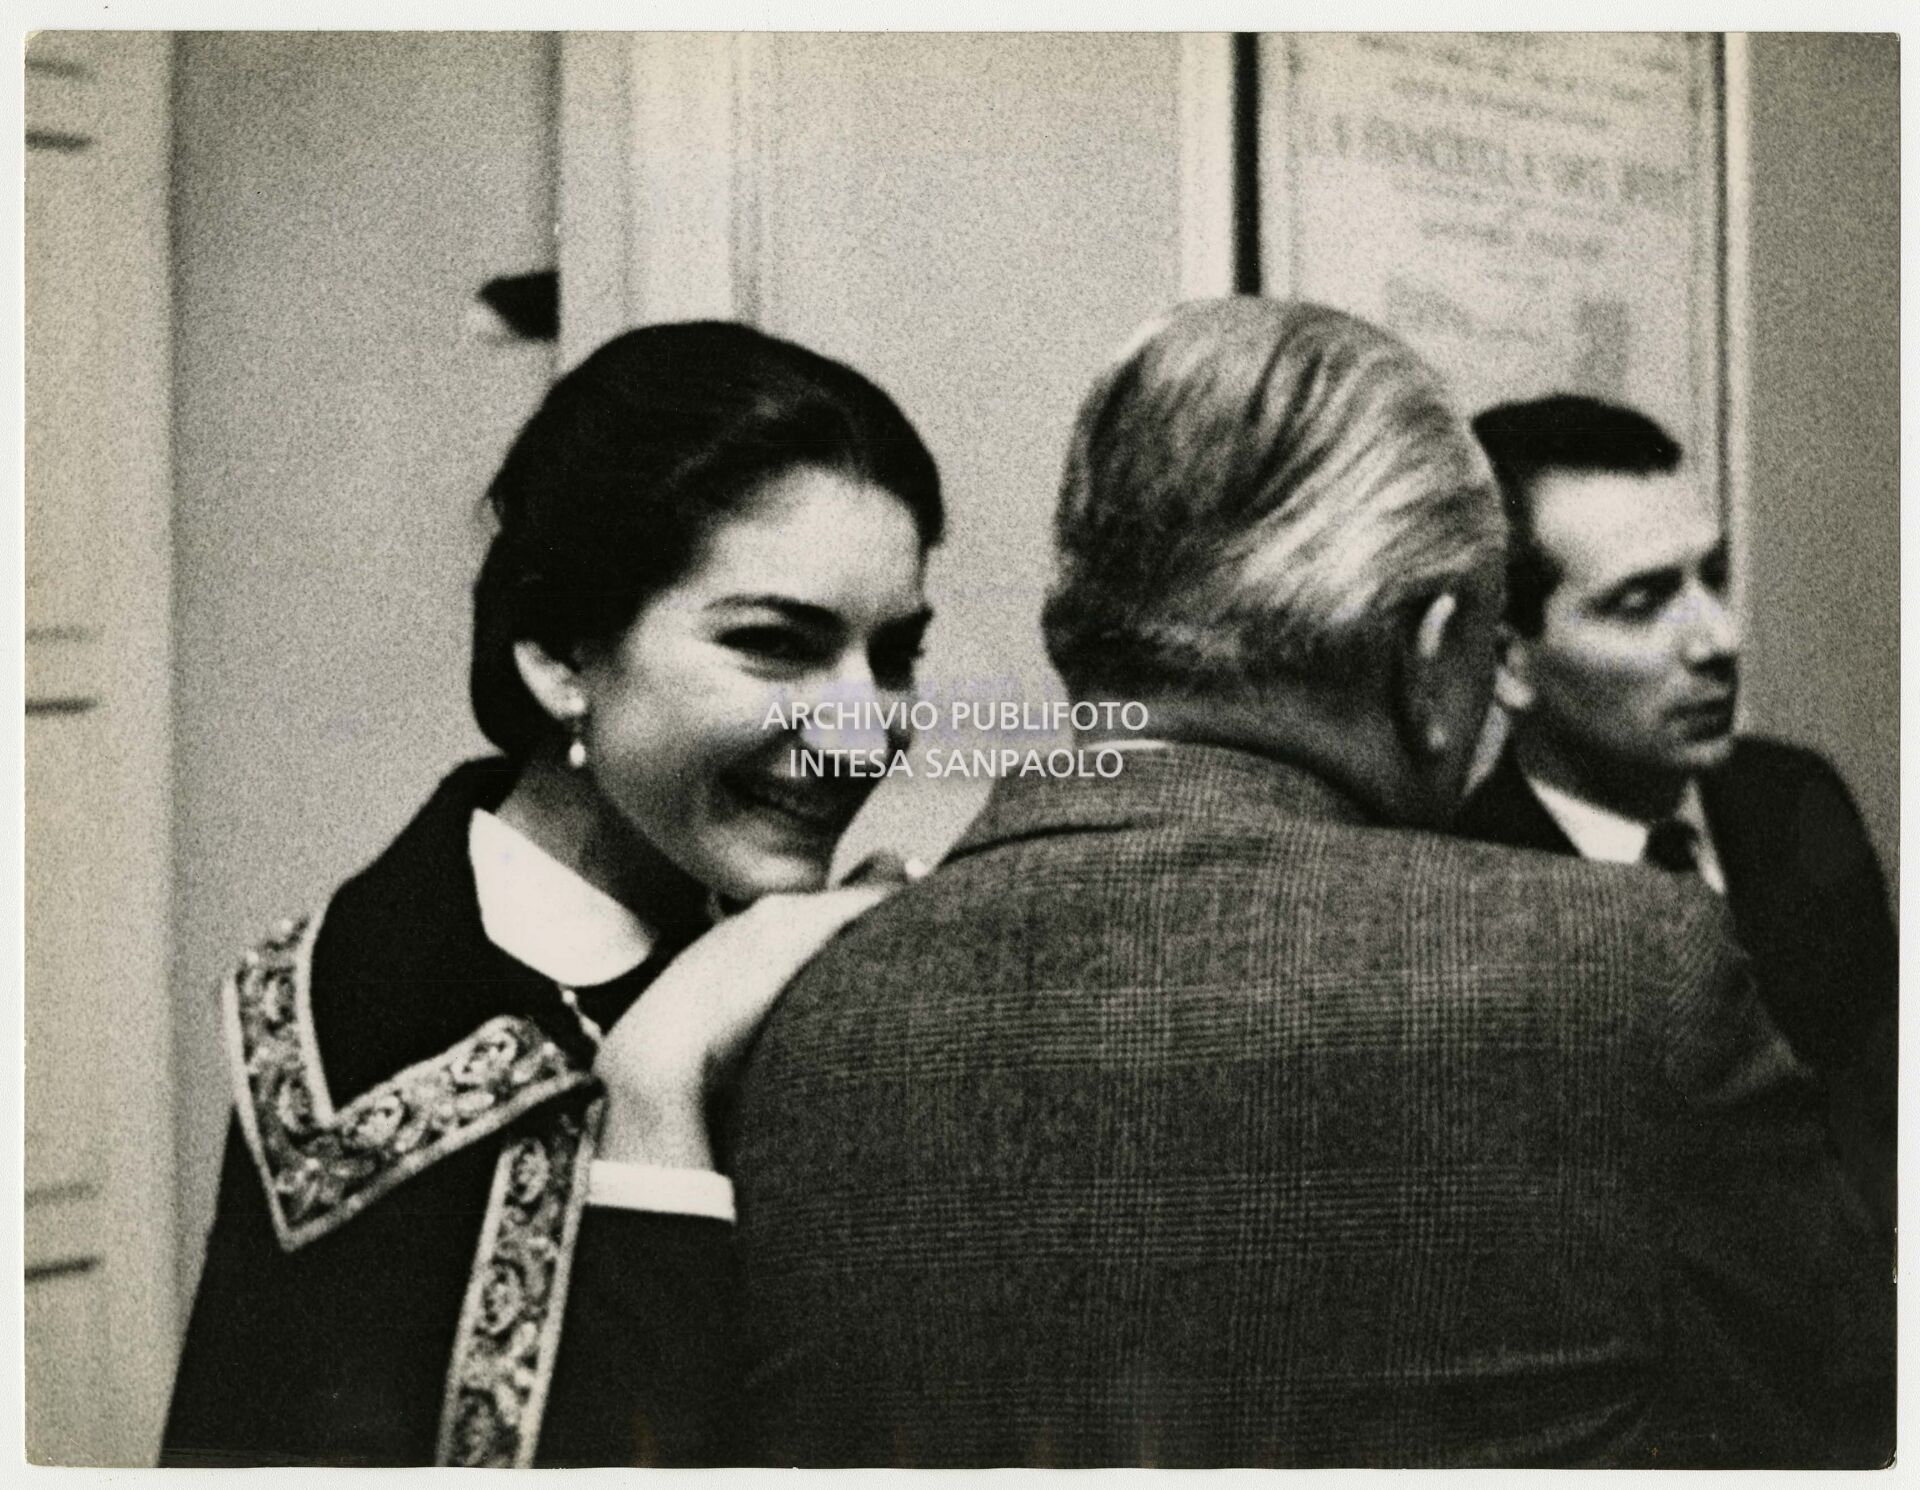 Maria Callas leans on the shoulder of her husband Meneghini backstage at La Scala